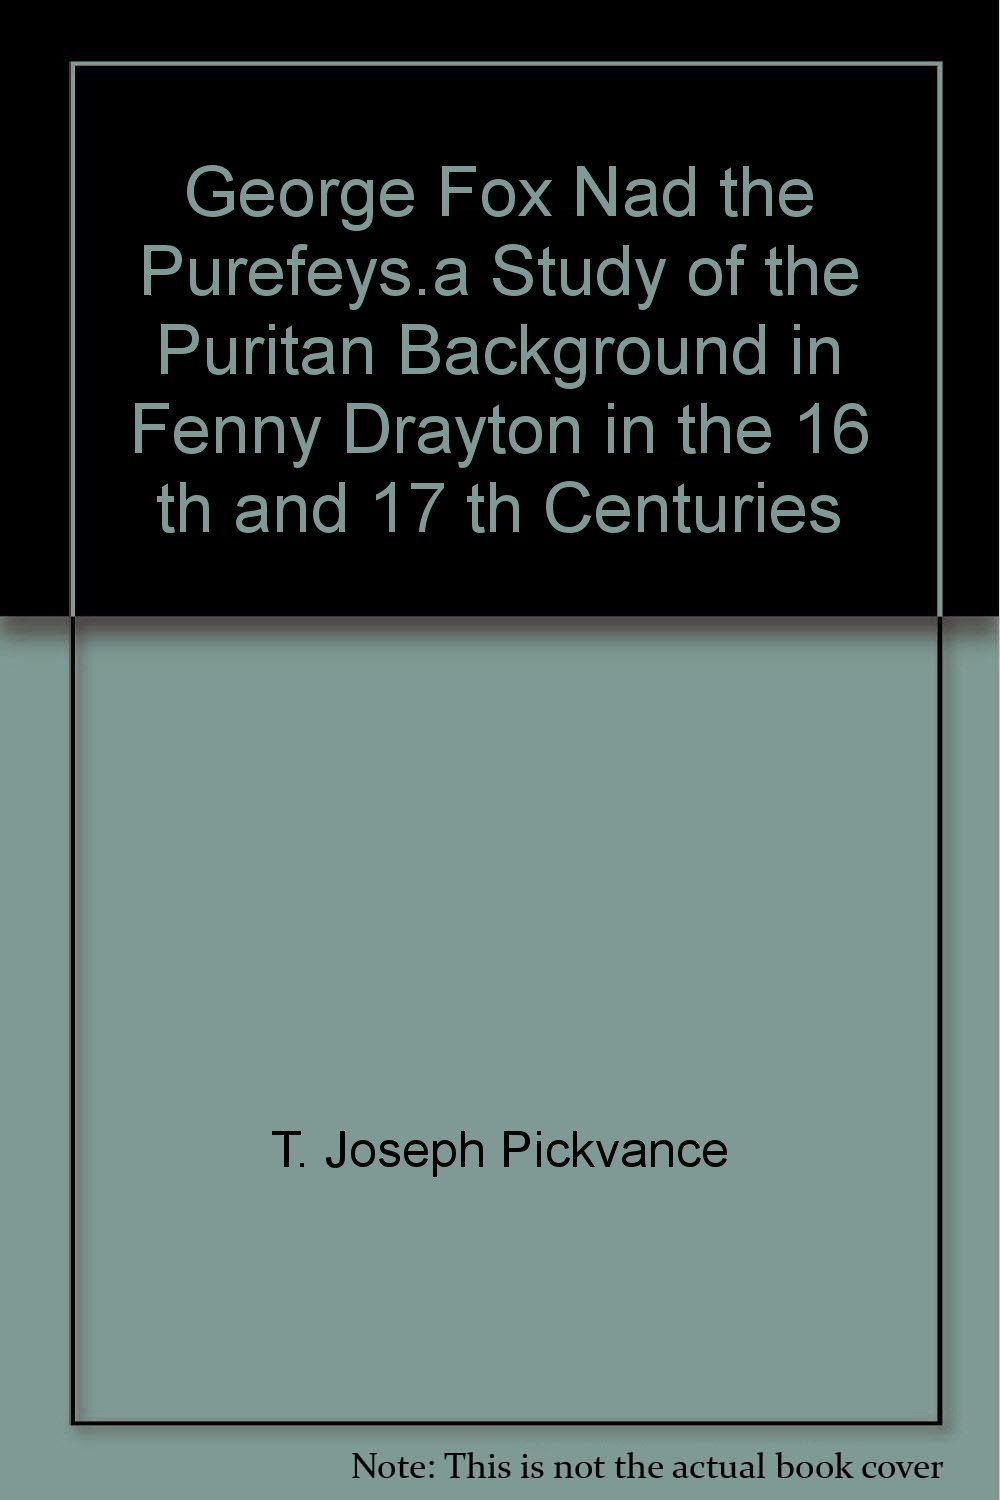 George Fox And The Purefeys A Study Of Puritan Background In